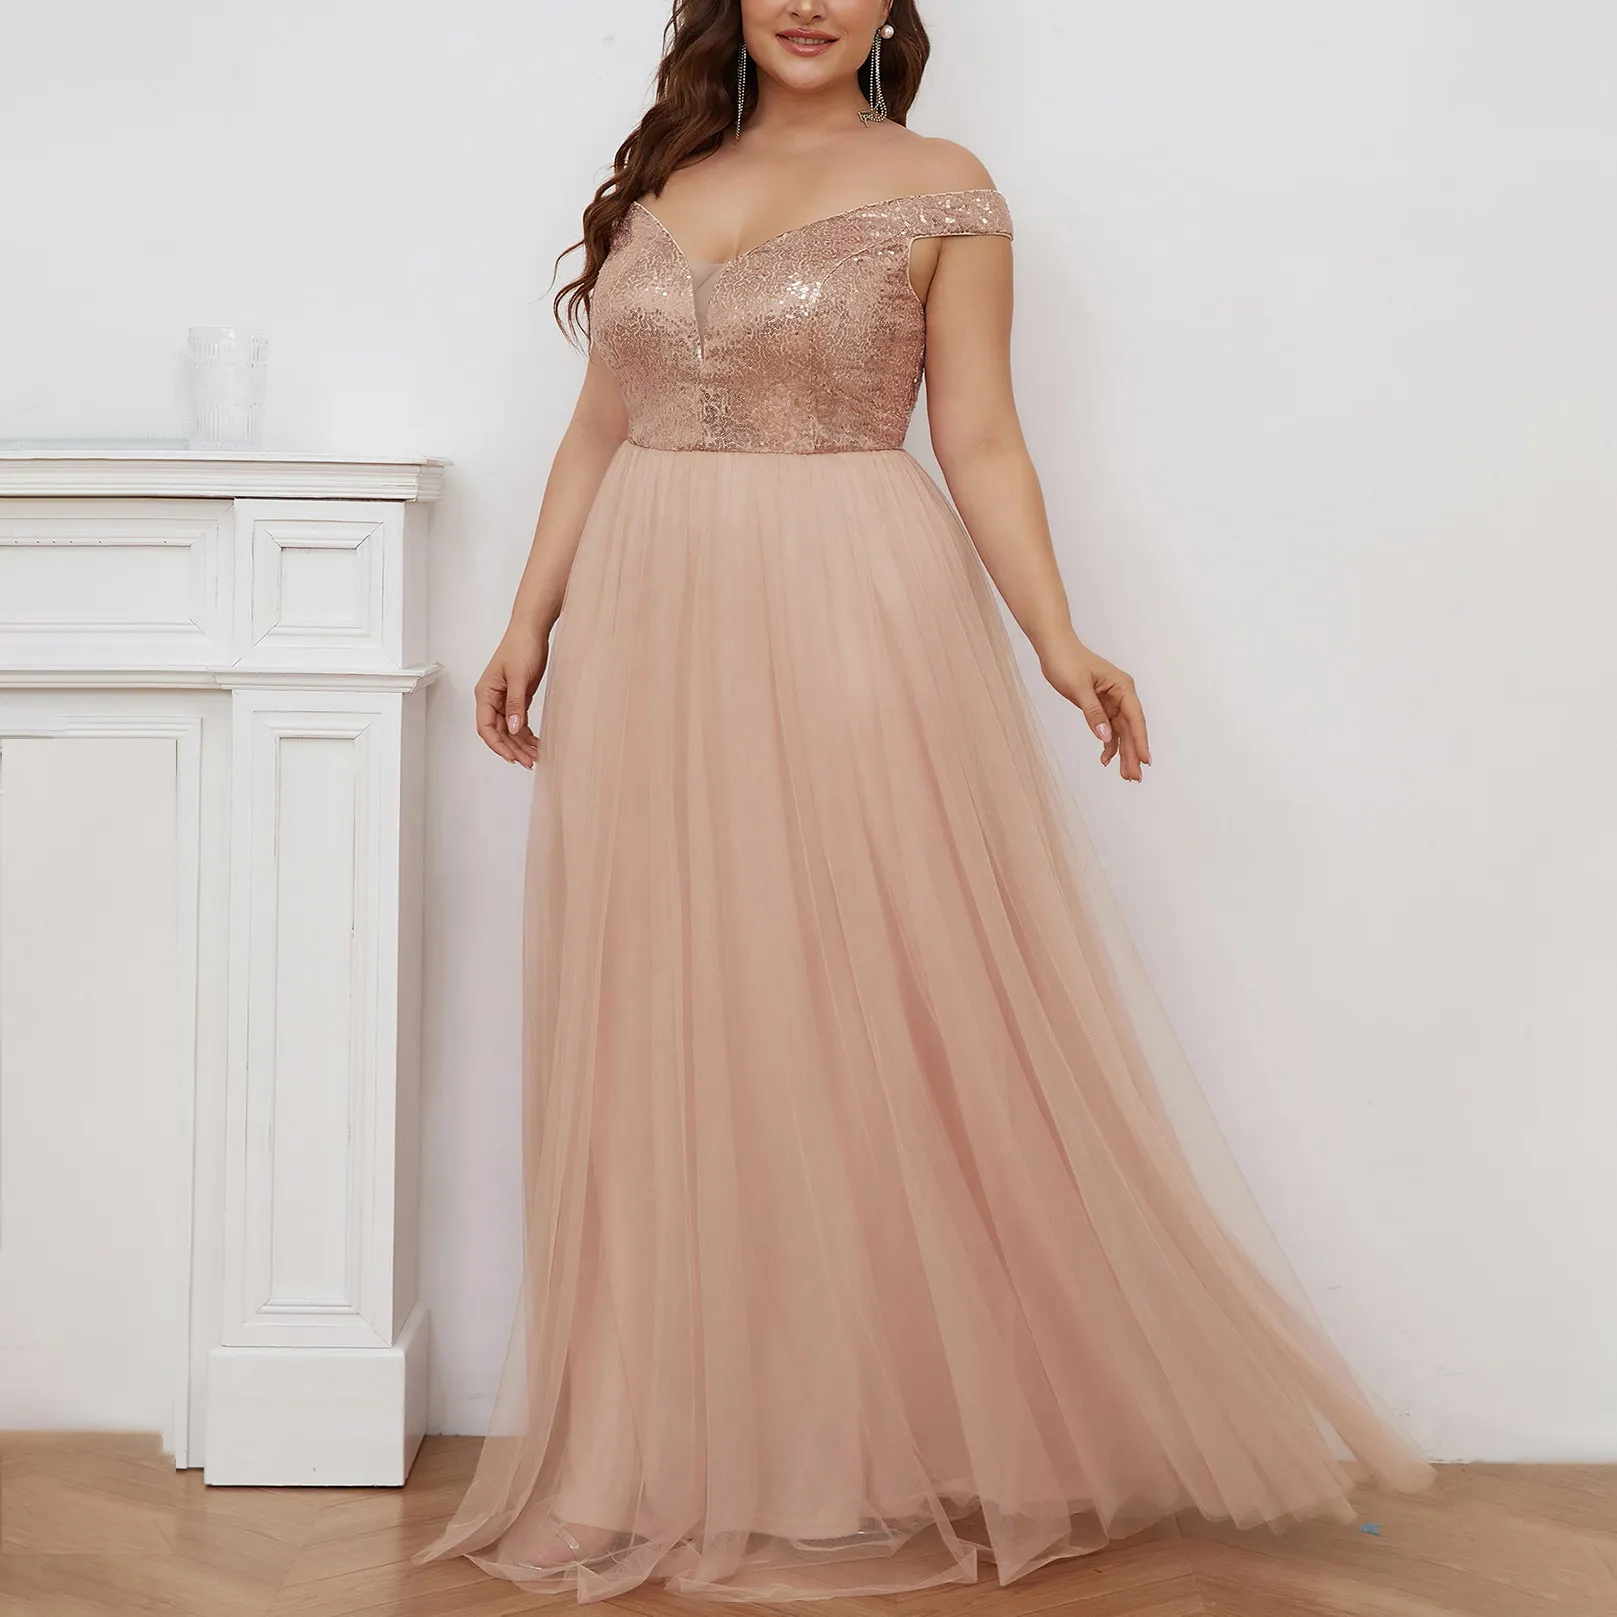 Plus Size Women Sexy V Neck Gold Sequin Tulle Elegant Party Lady Luxury Formal Prom Long Gown Evening Dresses For Wedding Guest